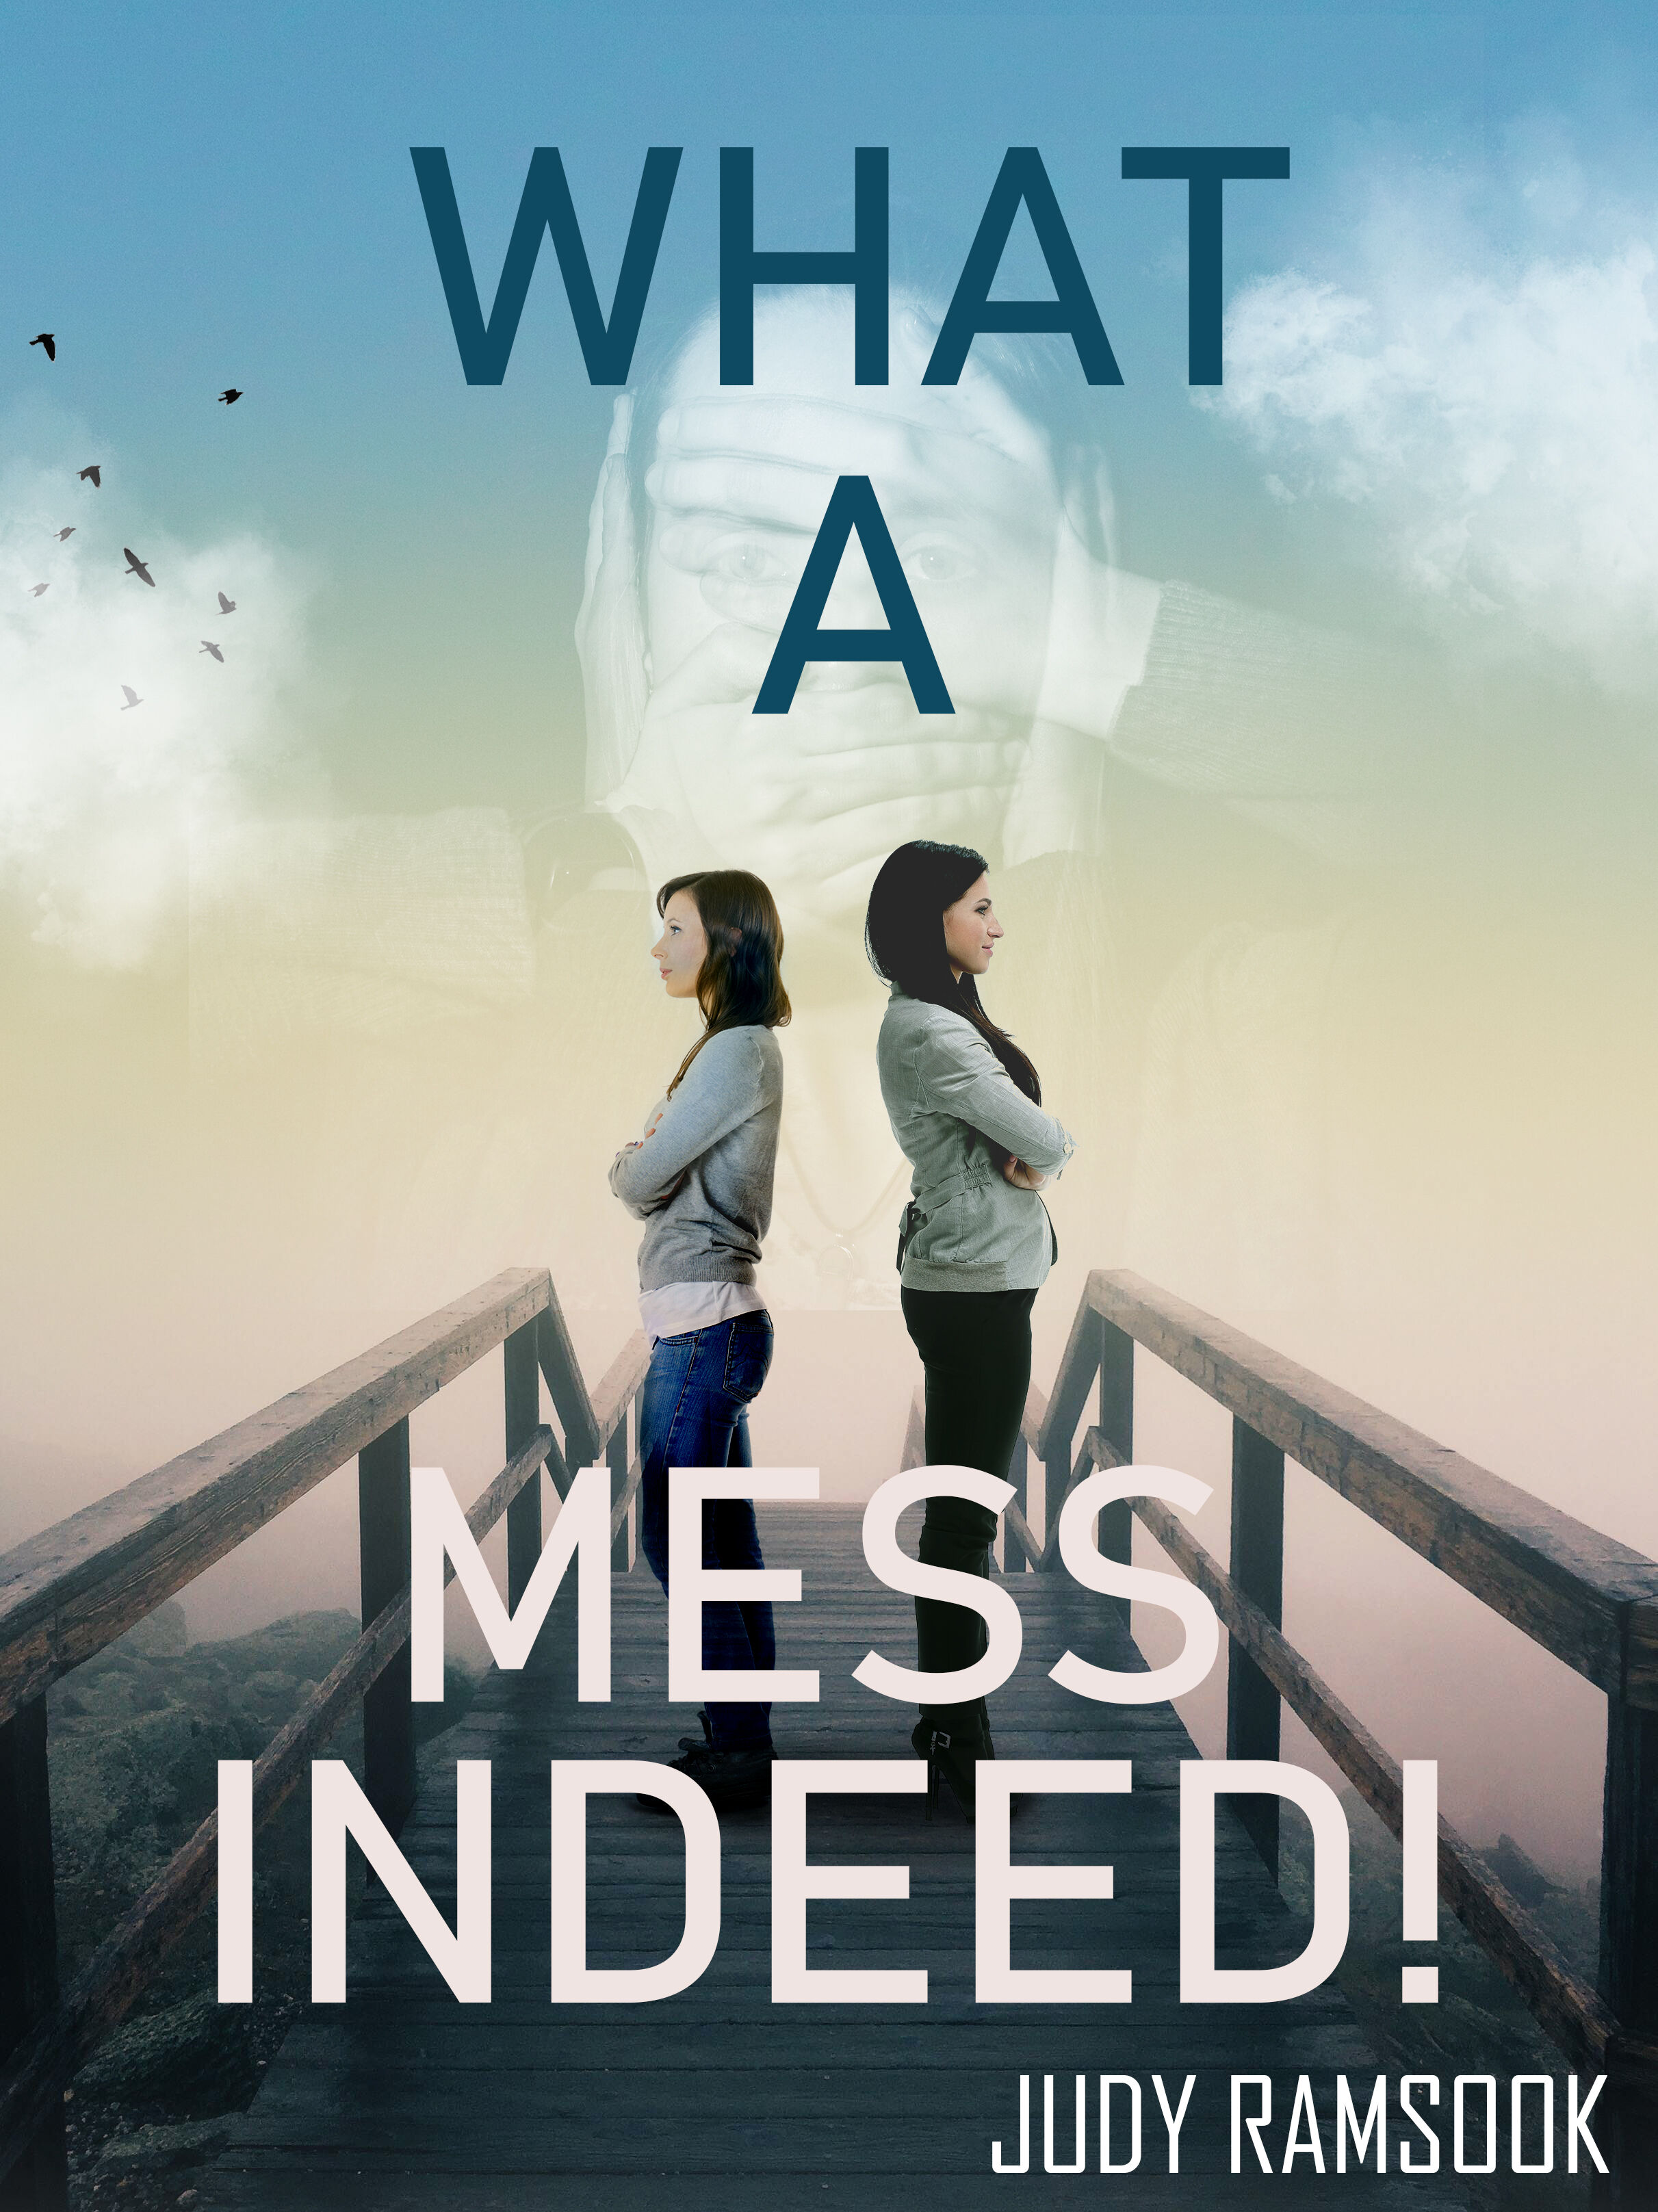 What A Mess Indeed!'s Book Image